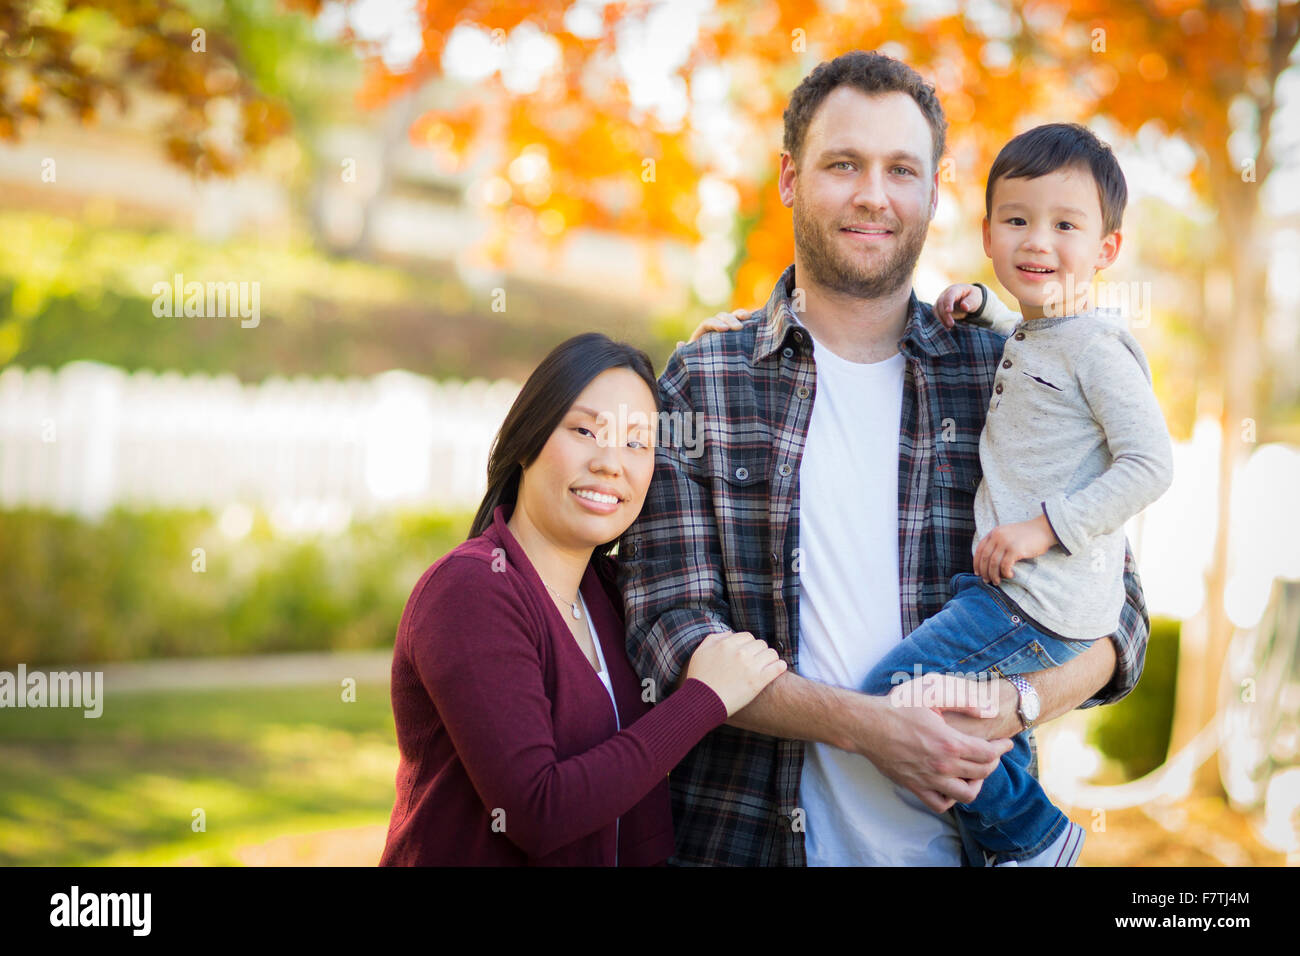 Happy Attractive Mixed Race Young Family Portrait Outdoors. Stock Photo